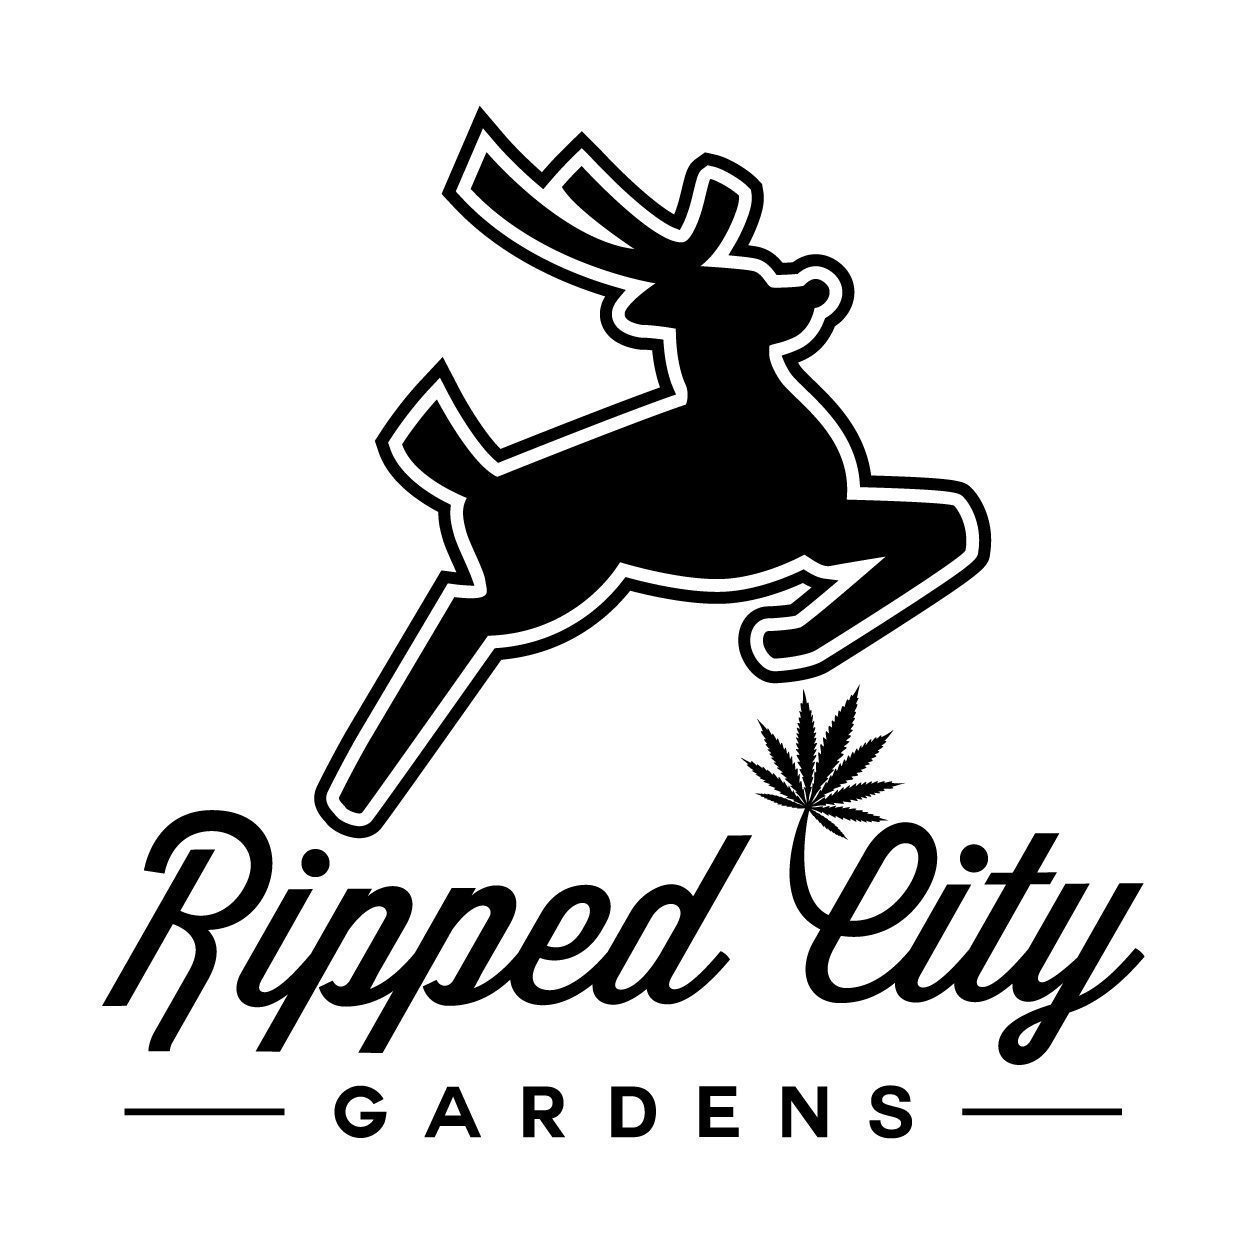 Ripped City Gardens